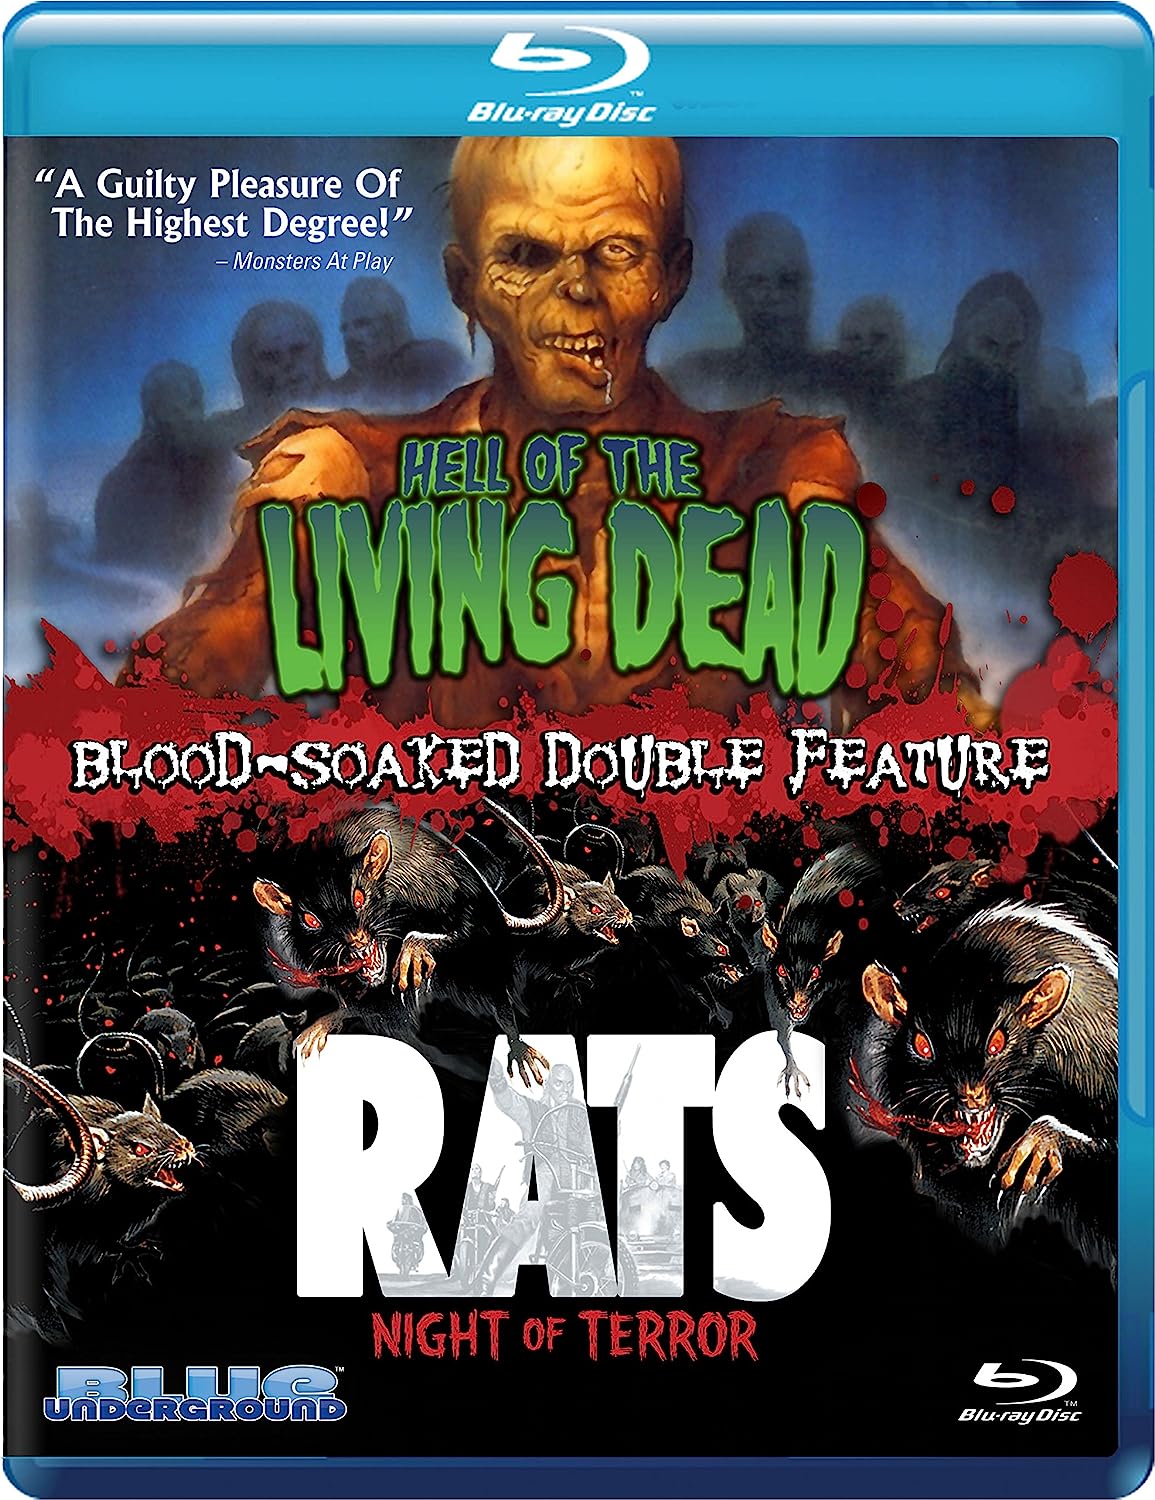 Hell Of The Living Dead / Rats: Night Of Terror (Blue Underground) - Darkside Records